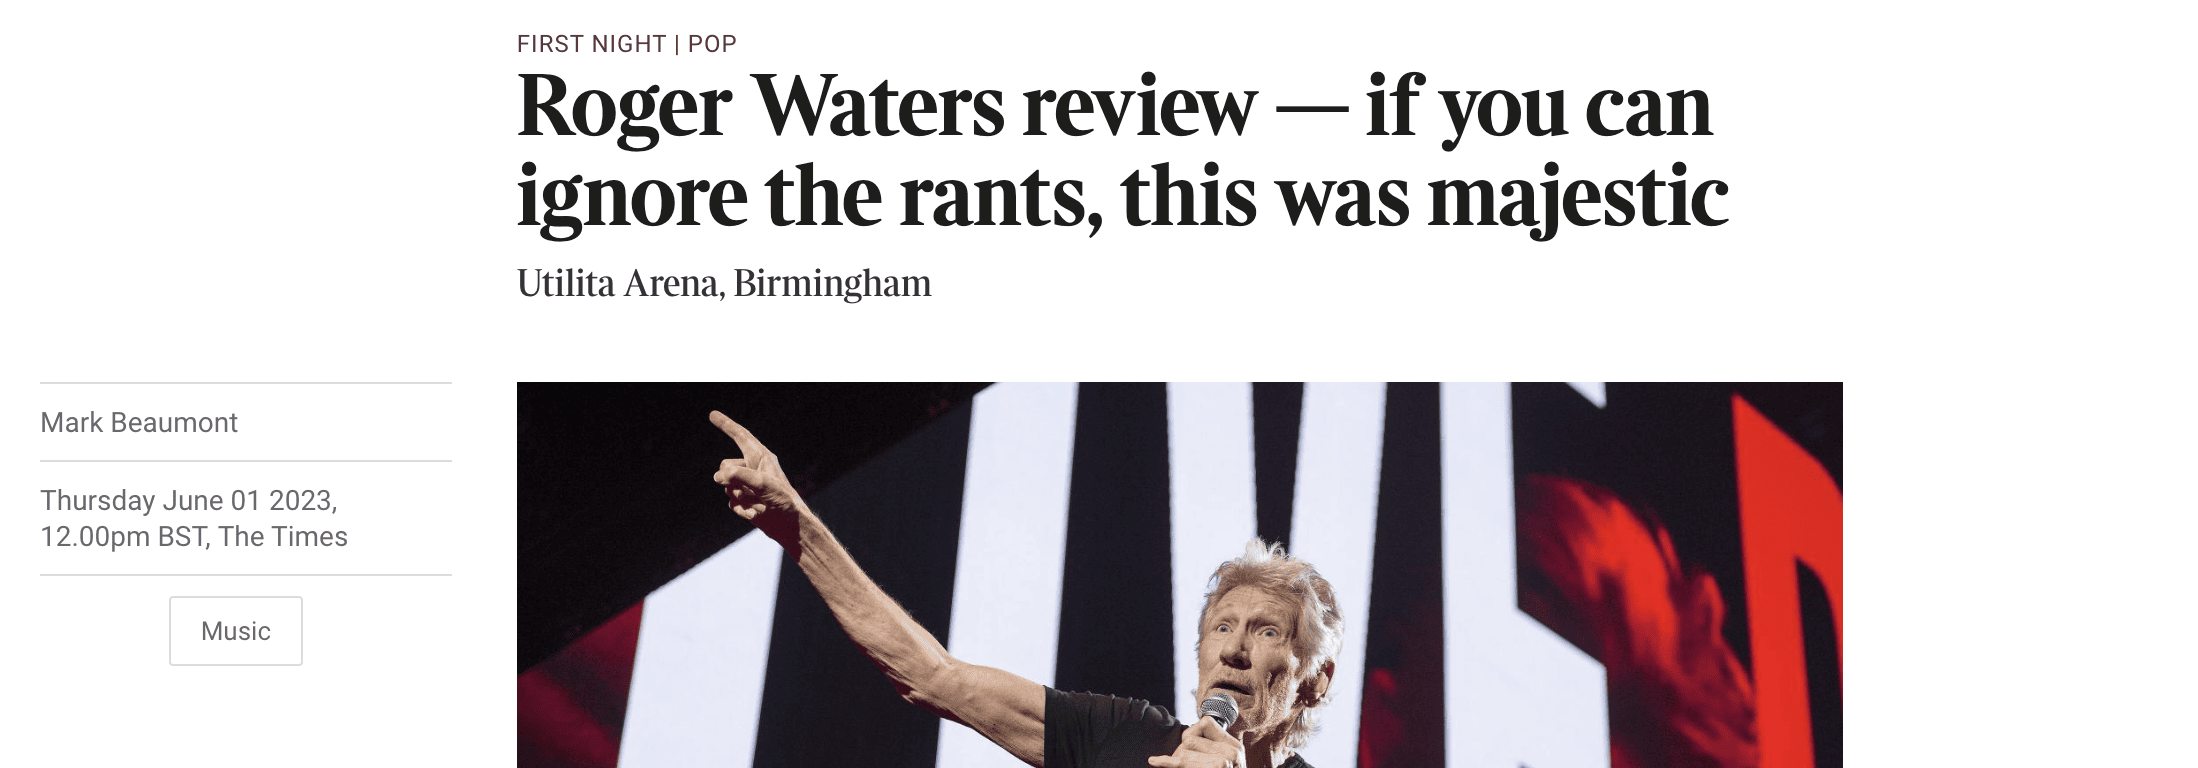 Roger Waters - The Times review